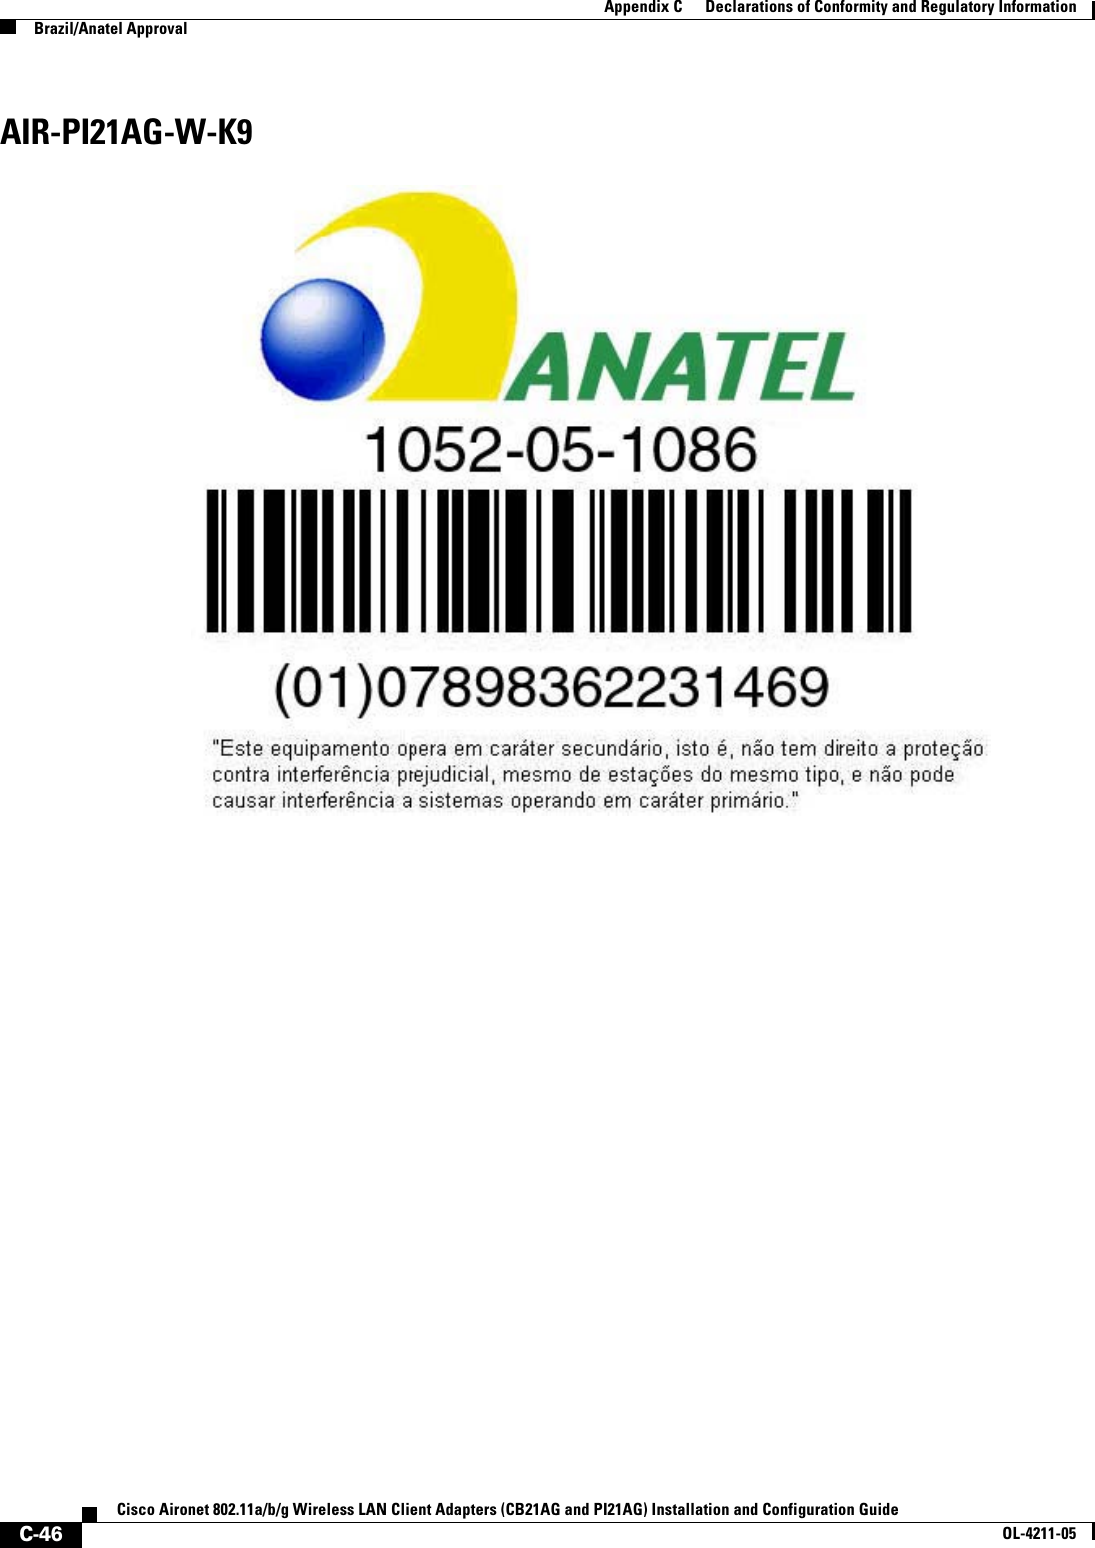 C-46Cisco Aironet 802.11a/b/g Wireless LAN Client Adapters (CB21AG and PI21AG) Installation and Configuration GuideOL-4211-05Appendix C      Declarations of Conformity and Regulatory InformationBrazil/Anatel ApprovalAIR-PI21AG-W-K9